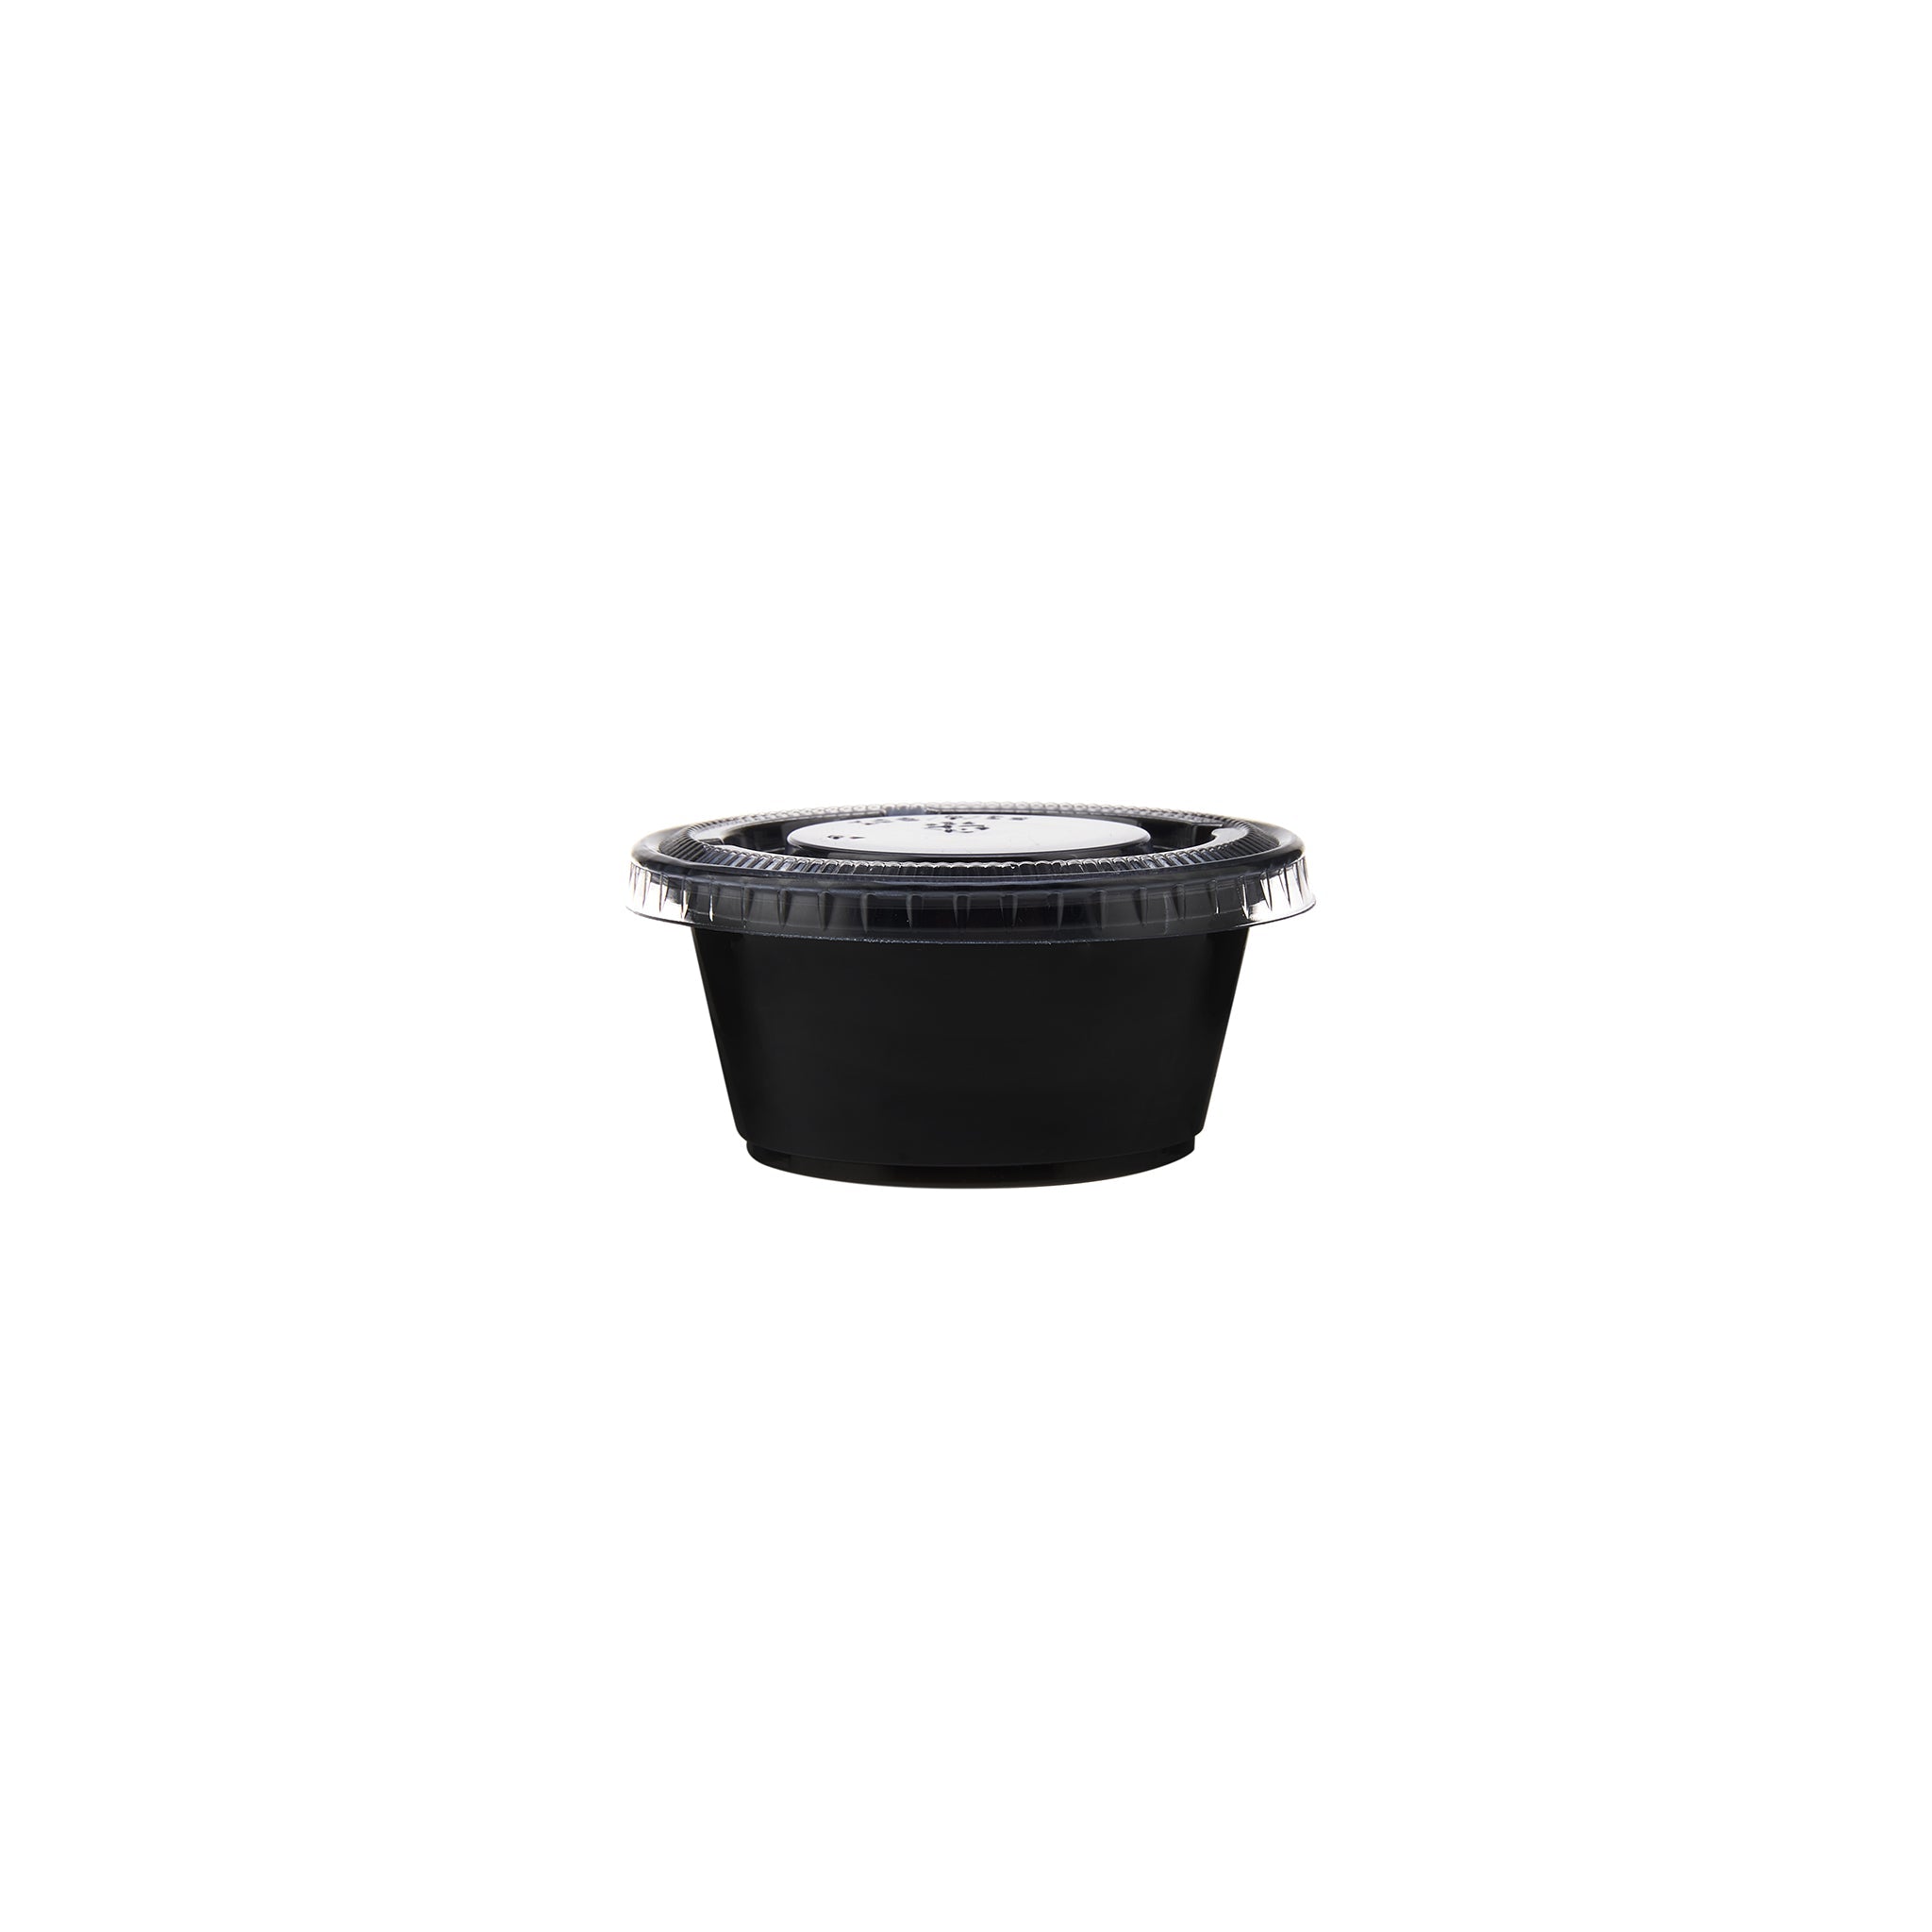 2500 Pieces 3 Oz Black Portion Cup With Clear Lid 80 CC